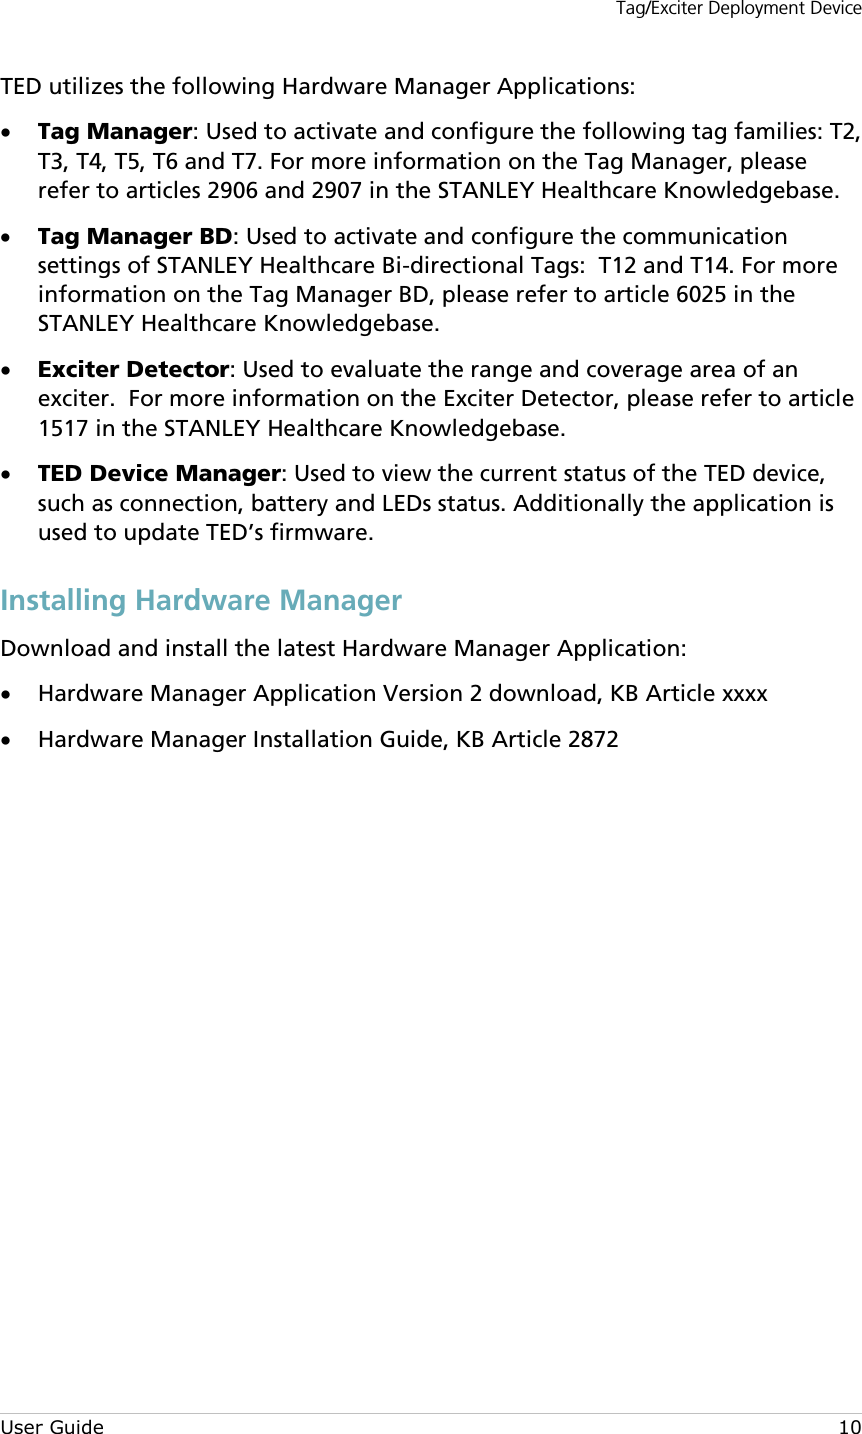 Tag/Exciter Deployment Device User Guide 10 TED utilizes the following Hardware Manager Applications: • Tag Manager: Used to activate and configure the following tag families: T2, T3, T4, T5, T6 and T7. For more information on the Tag Manager, please refer to articles 2906 and 2907 in the STANLEY Healthcare Knowledgebase. • Tag Manager BD: Used to activate and configure the communication settings of STANLEY Healthcare Bi-directional Tags:  T12 and T14. For more information on the Tag Manager BD, please refer to article 6025 in the STANLEY Healthcare Knowledgebase. • Exciter Detector: Used to evaluate the range and coverage area of an exciter.  For more information on the Exciter Detector, please refer to article 1517 in the STANLEY Healthcare Knowledgebase. • TED Device Manager: Used to view the current status of the TED device, such as connection, battery and LEDs status. Additionally the application is used to update TED’s firmware. Installing Hardware Manager Download and install the latest Hardware Manager Application: • Hardware Manager Application Version 2 download, KB Article xxxx • Hardware Manager Installation Guide, KB Article 2872             